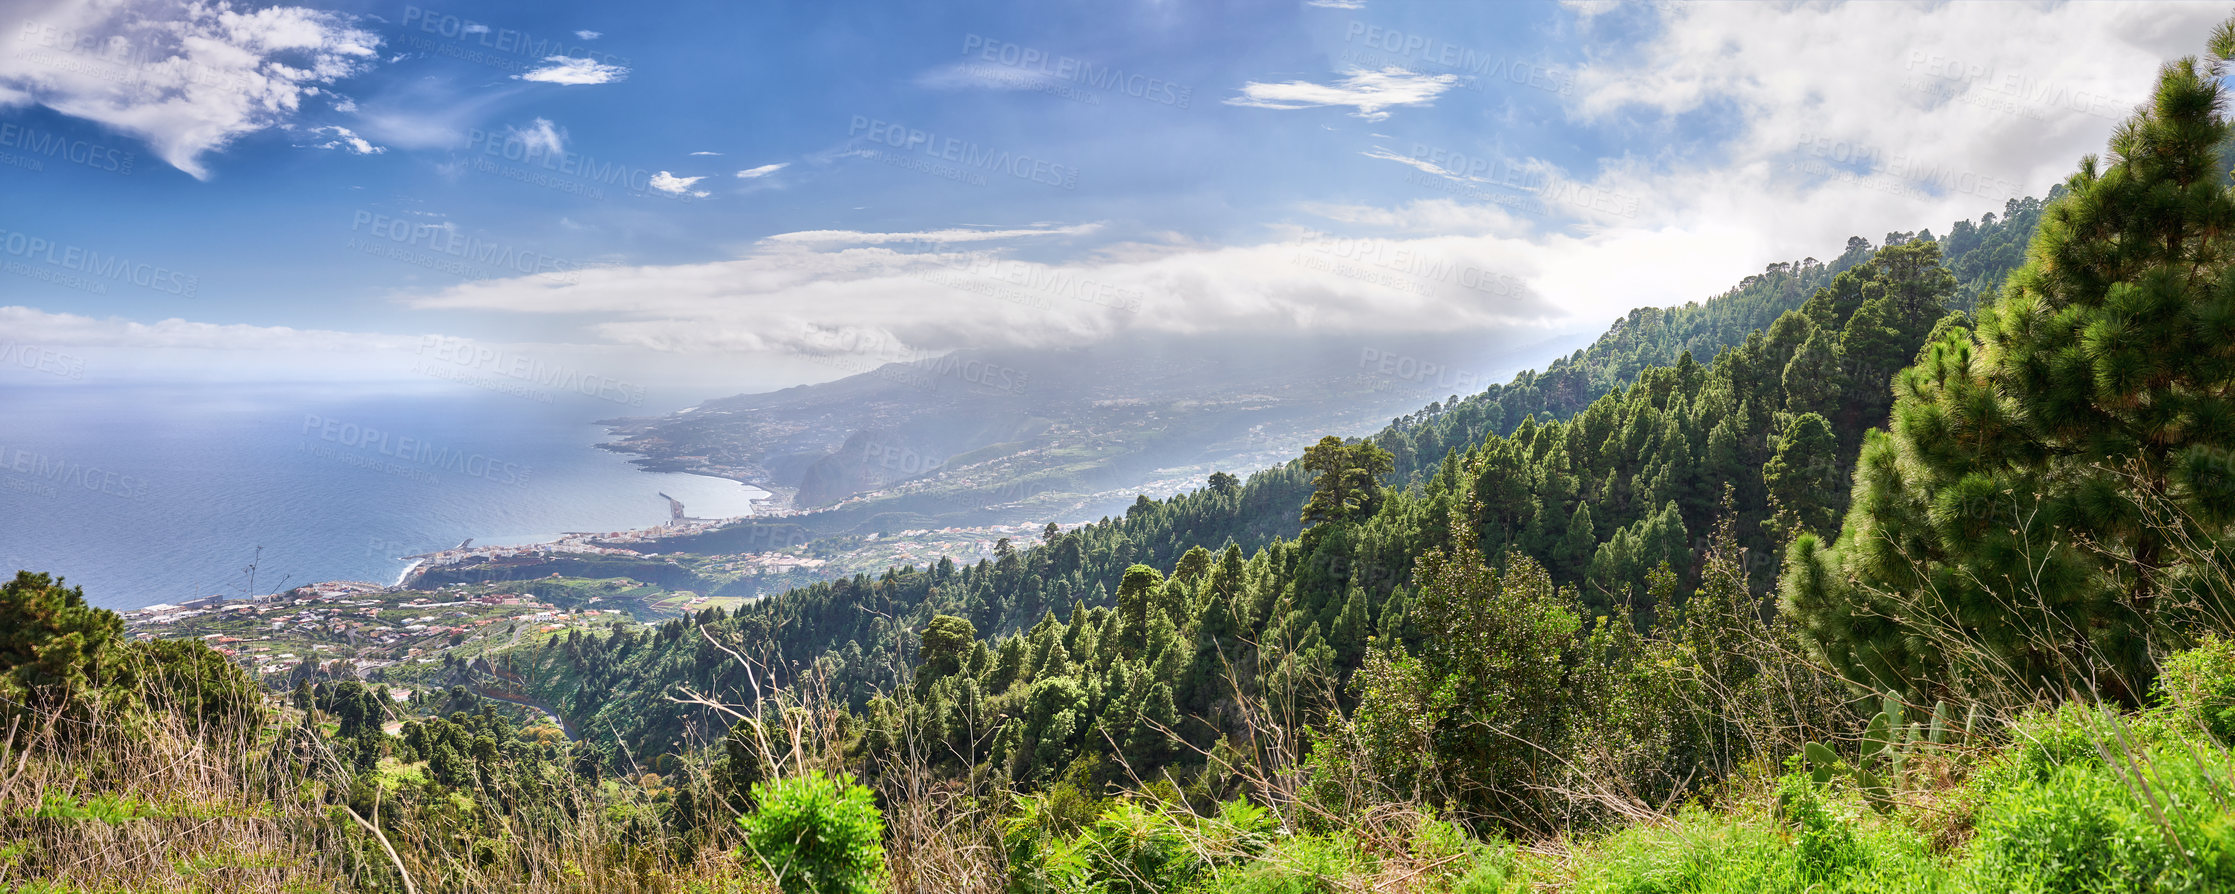 Buy stock photo Panoramic banner of Canary islands in Spain. Lush green forest landscape in fresh, quiet nature. Scenic views of a soothing, silent rural land, tall trees growing under cloudy sky with copyspace